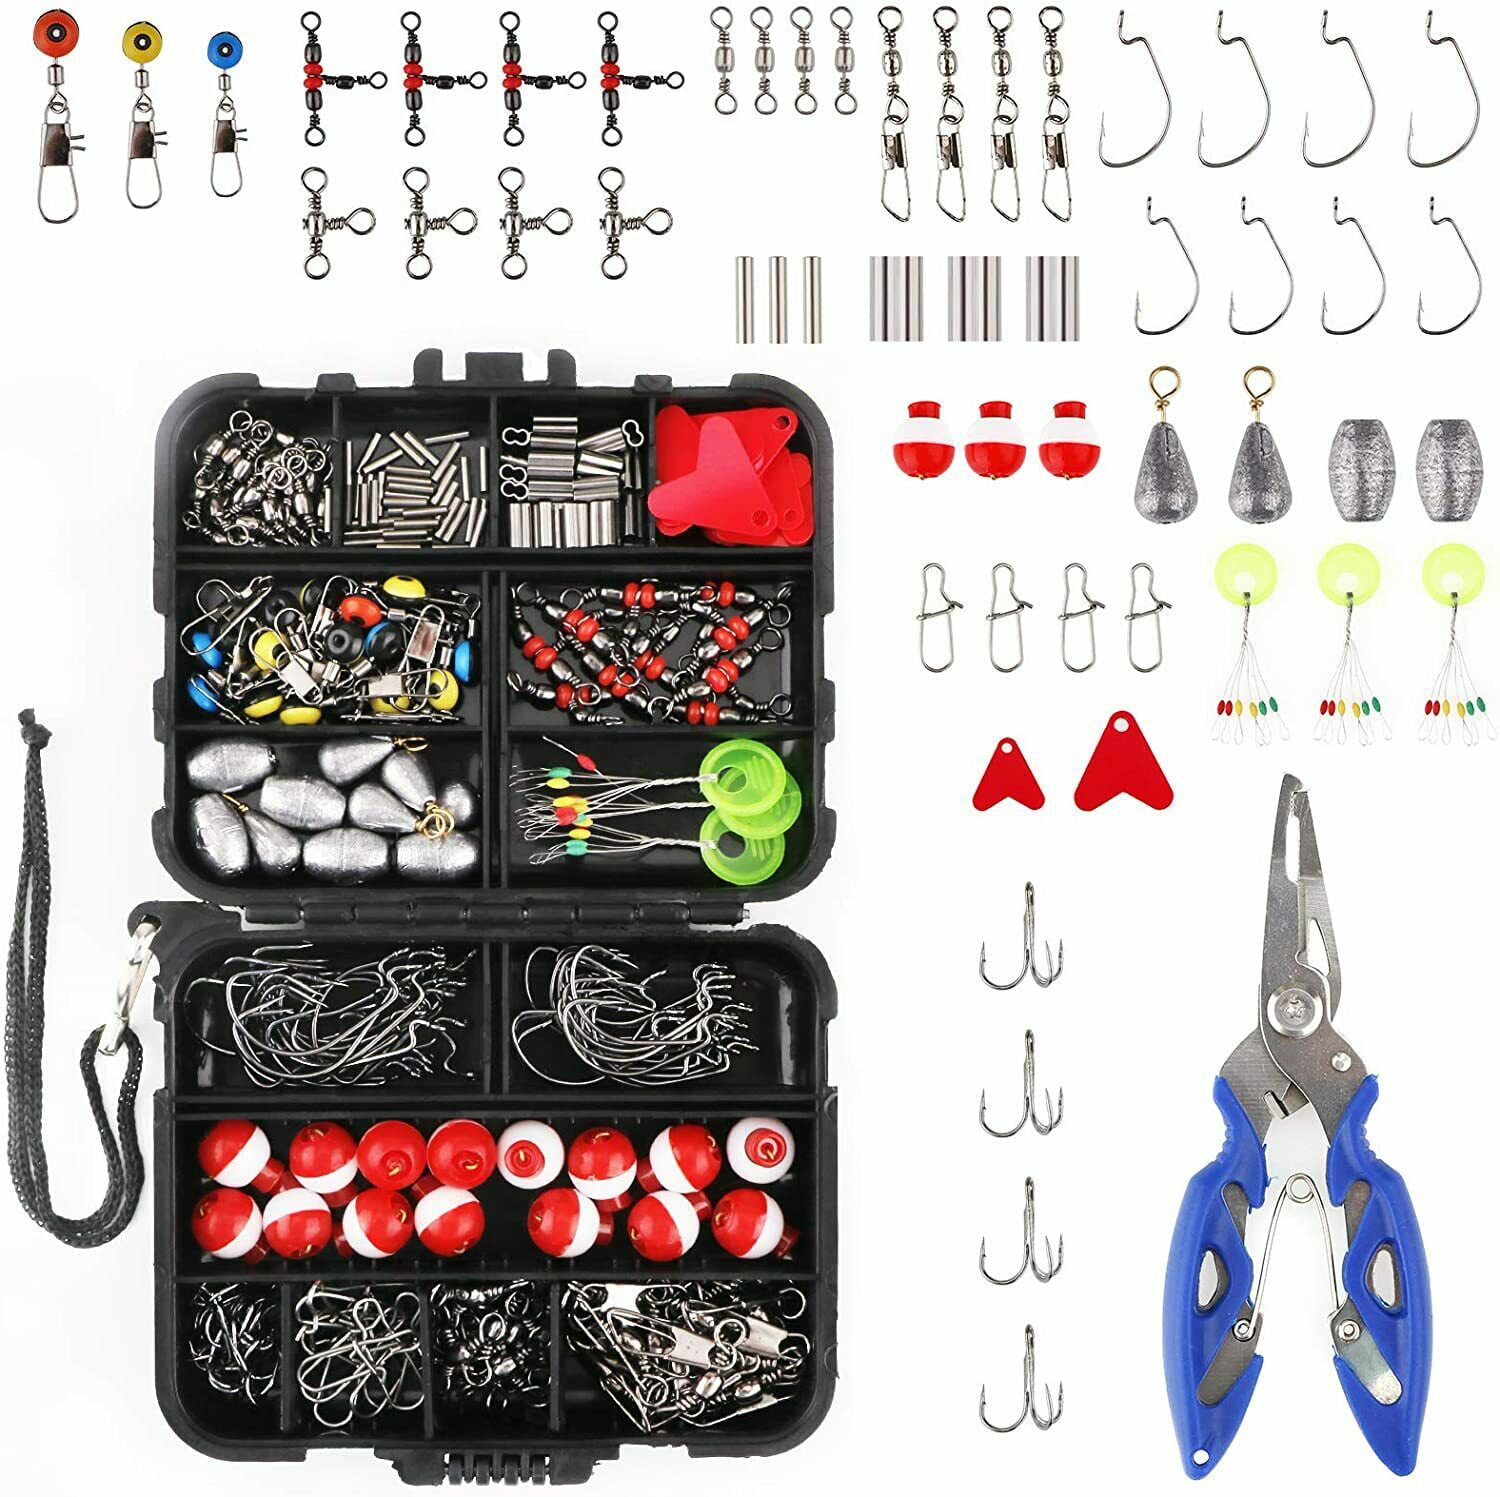 263pcs Fishing Tackle Kit with Terminal Accessories, UK